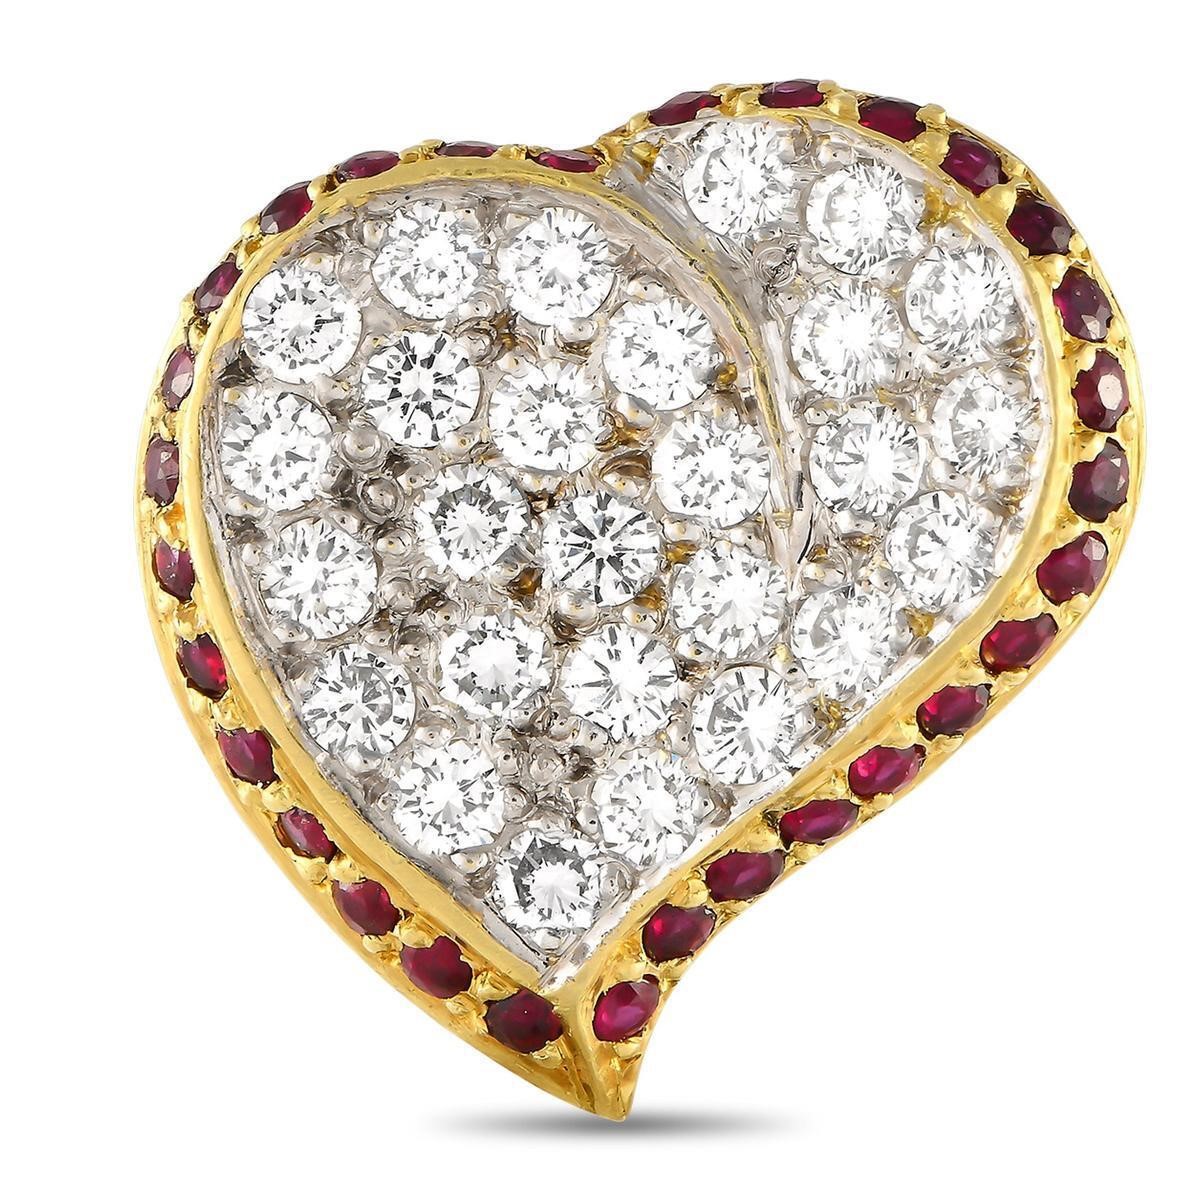 18K Yellow Gold 3.0ct Diamond and Ruby Heart Brooc